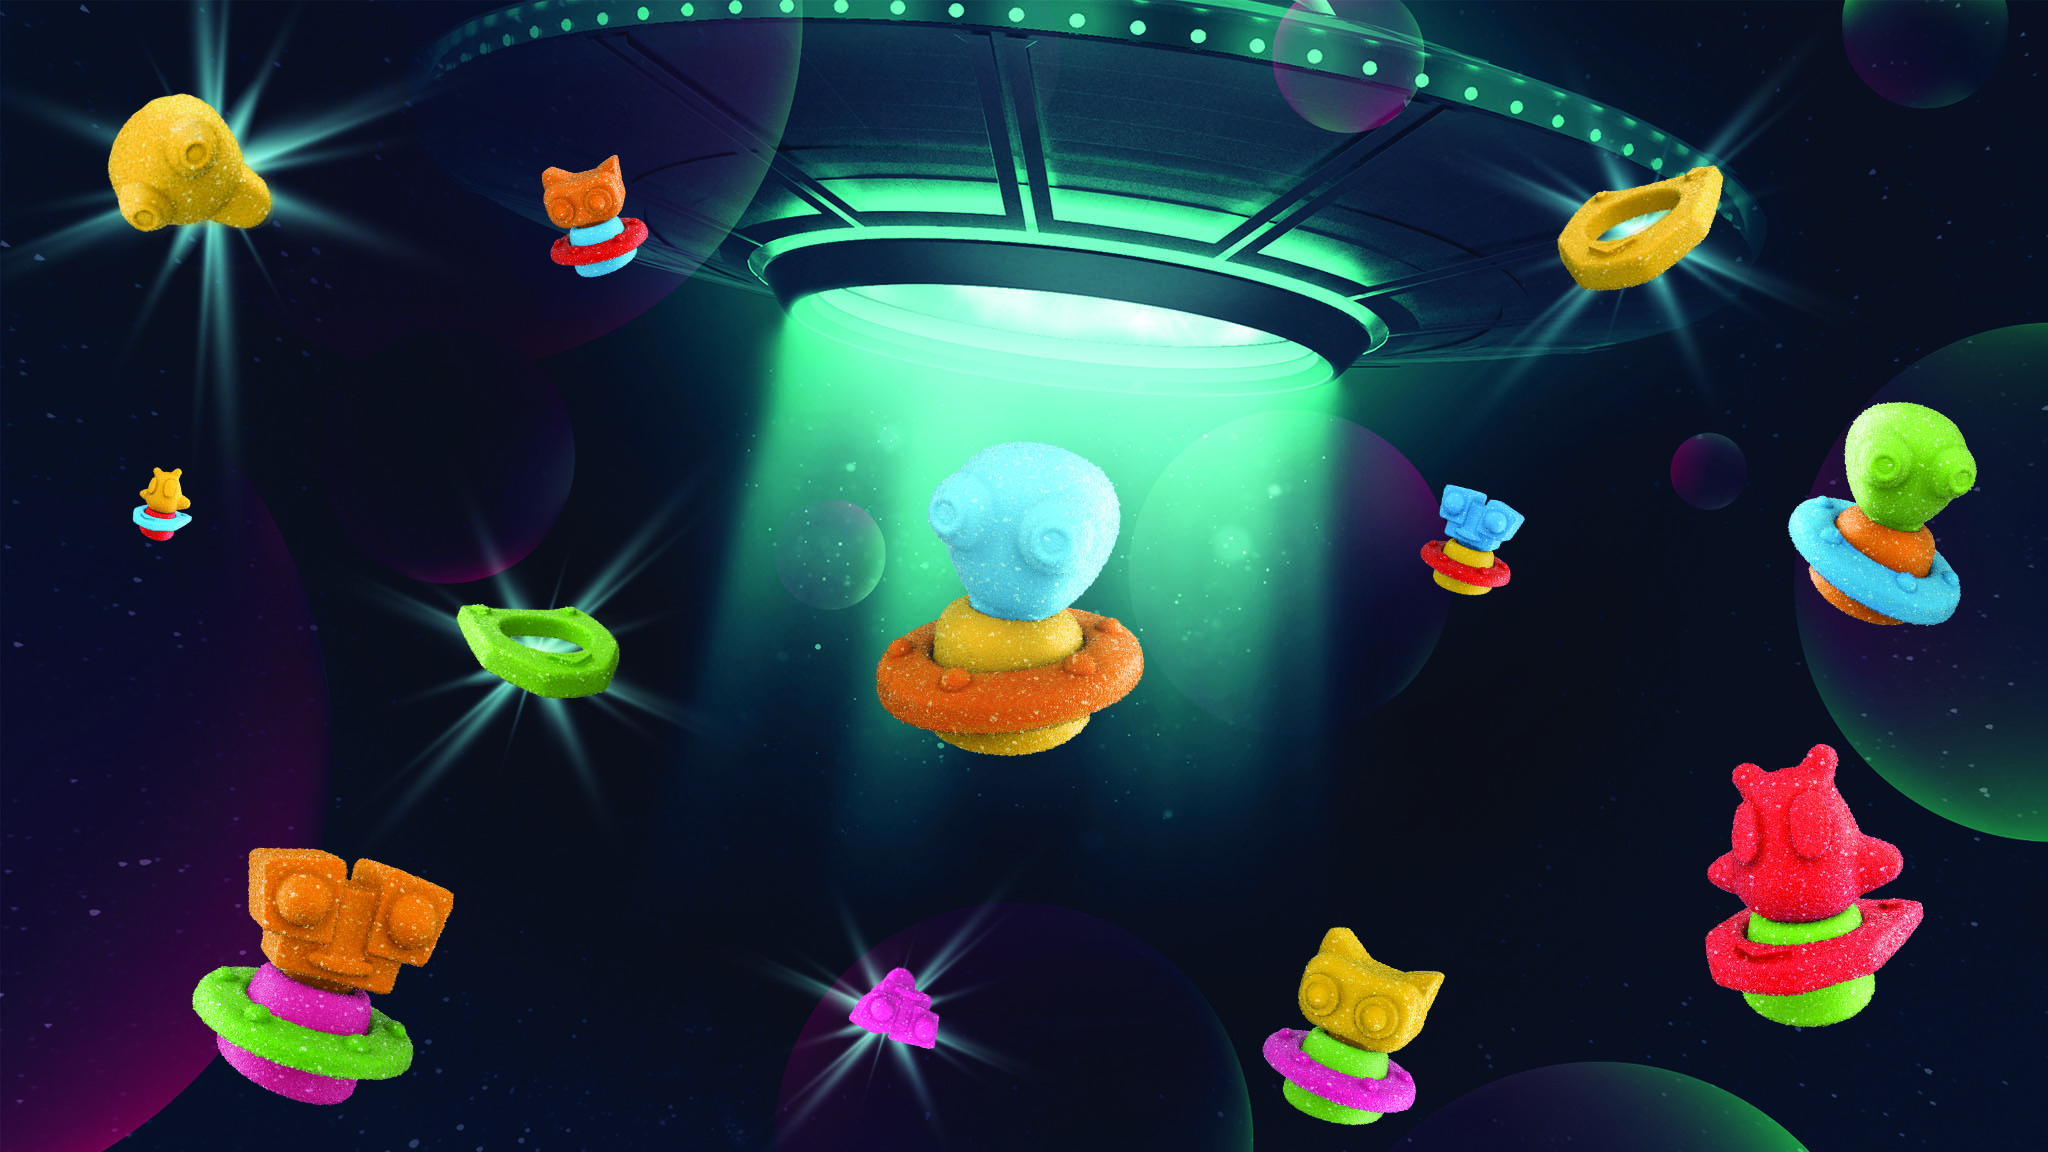 trolli gummy creations scattered about in a space-like setting with a UFO in the middle